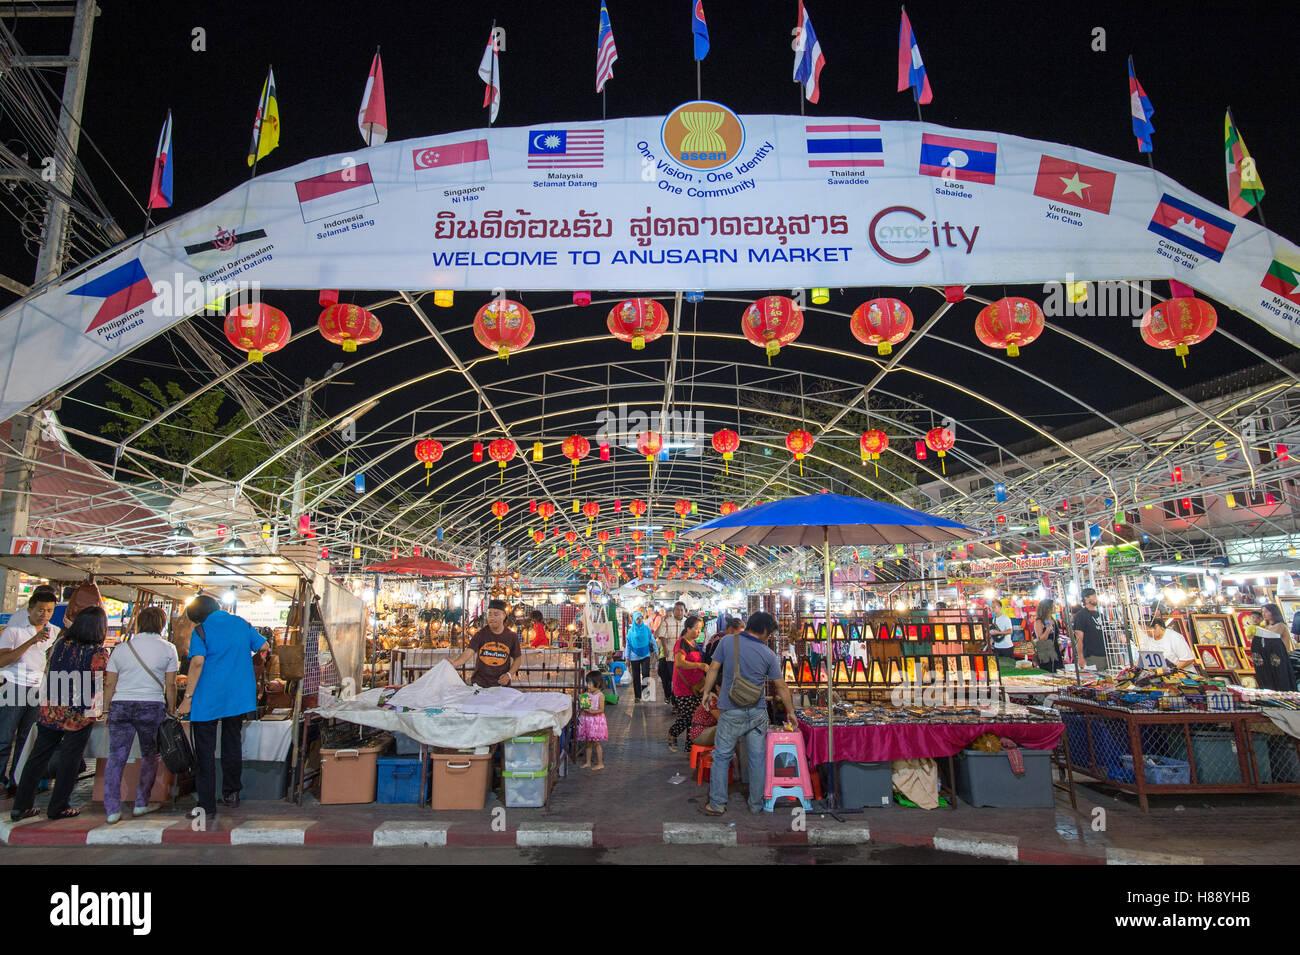 Night market in Chiang Mai. Chiang Mai is a major tourist destination in northern Thailand. Stock Photo